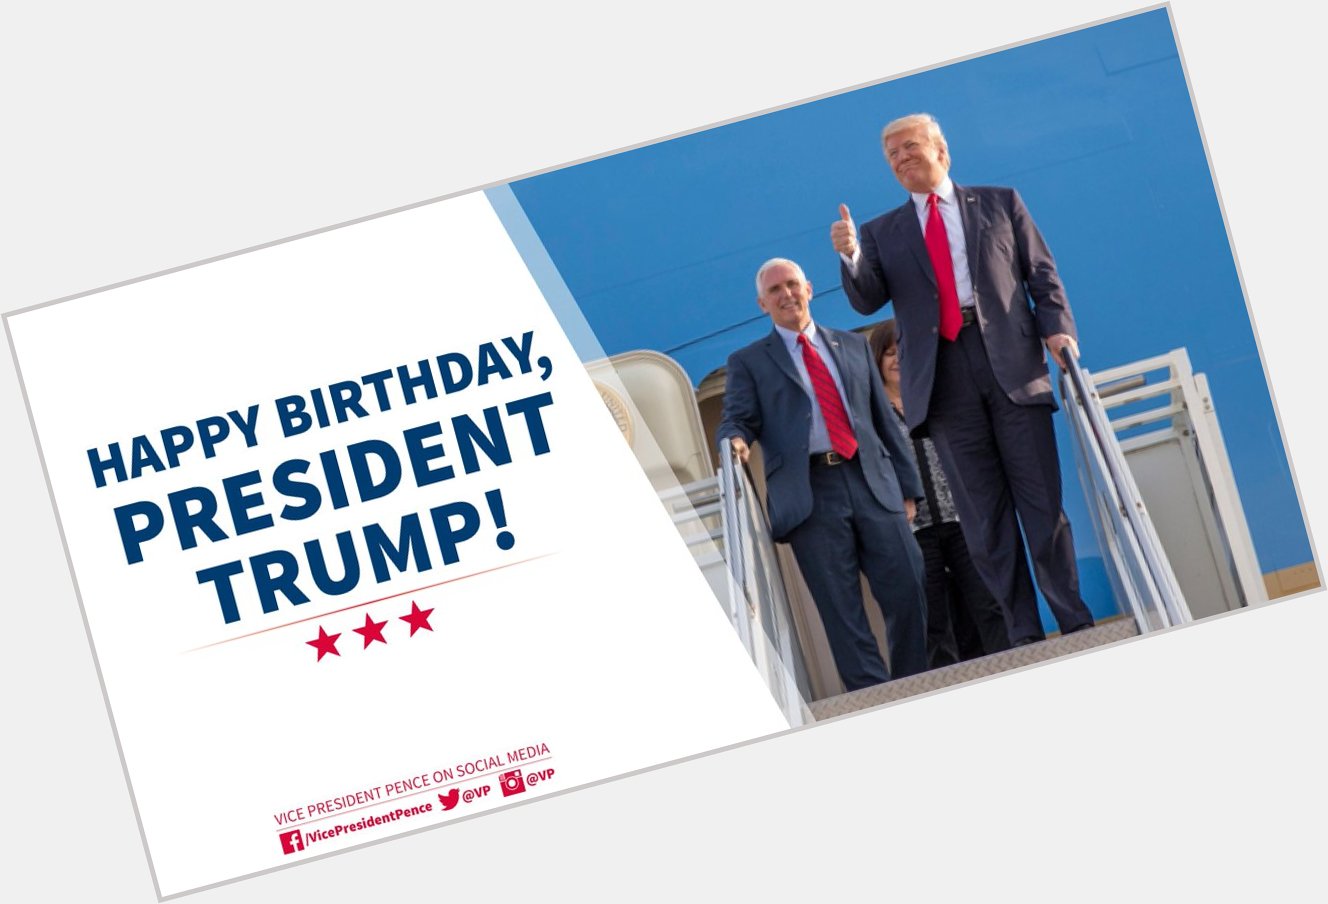 Happy birthday to the 45th President of the United States and my good friend, Donald Trump! 